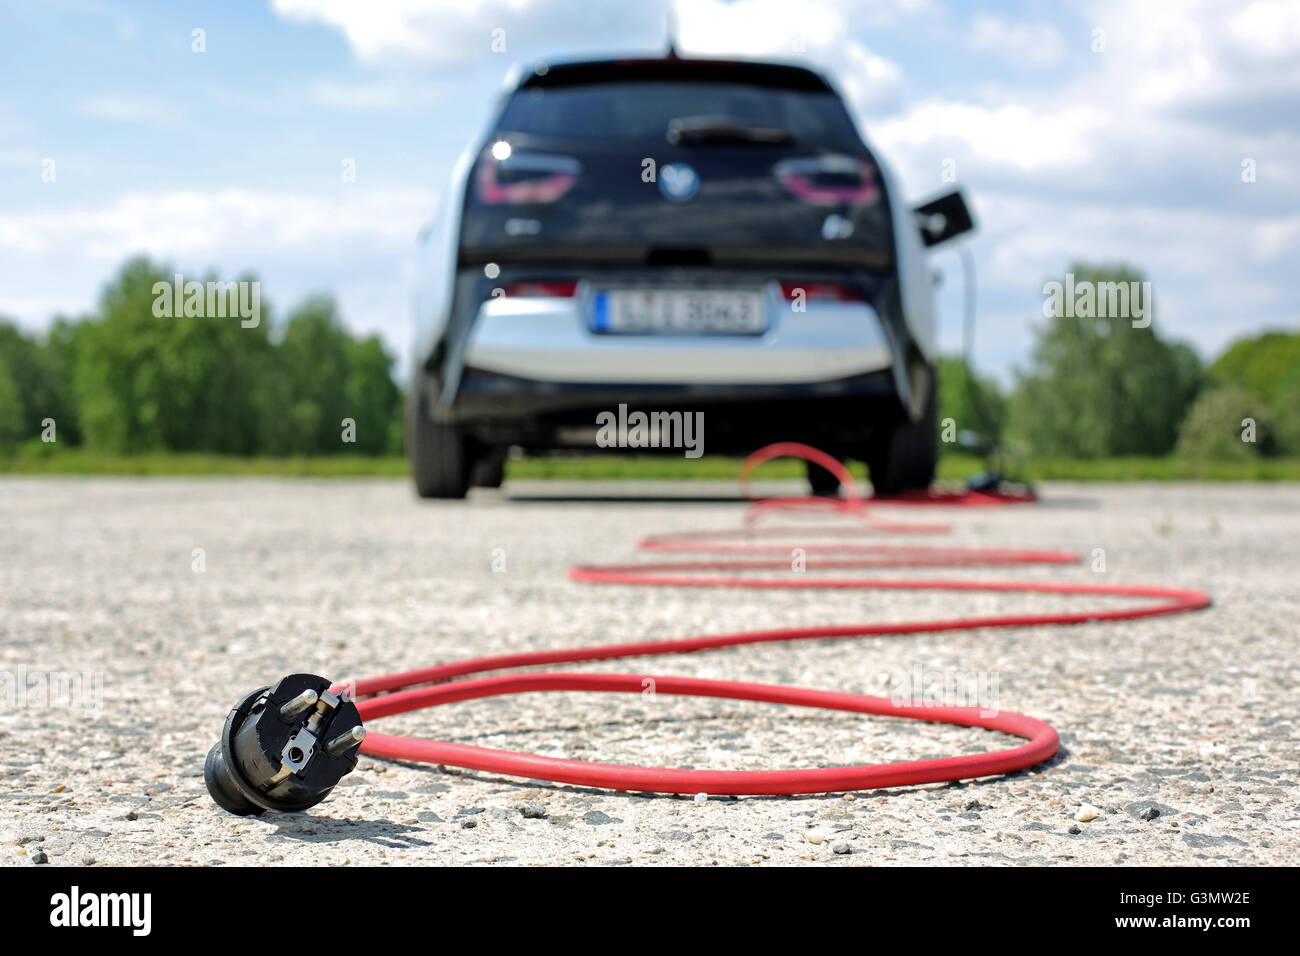 Symbolic image - A red electric cable behind a BMW i3 electric car on a ...